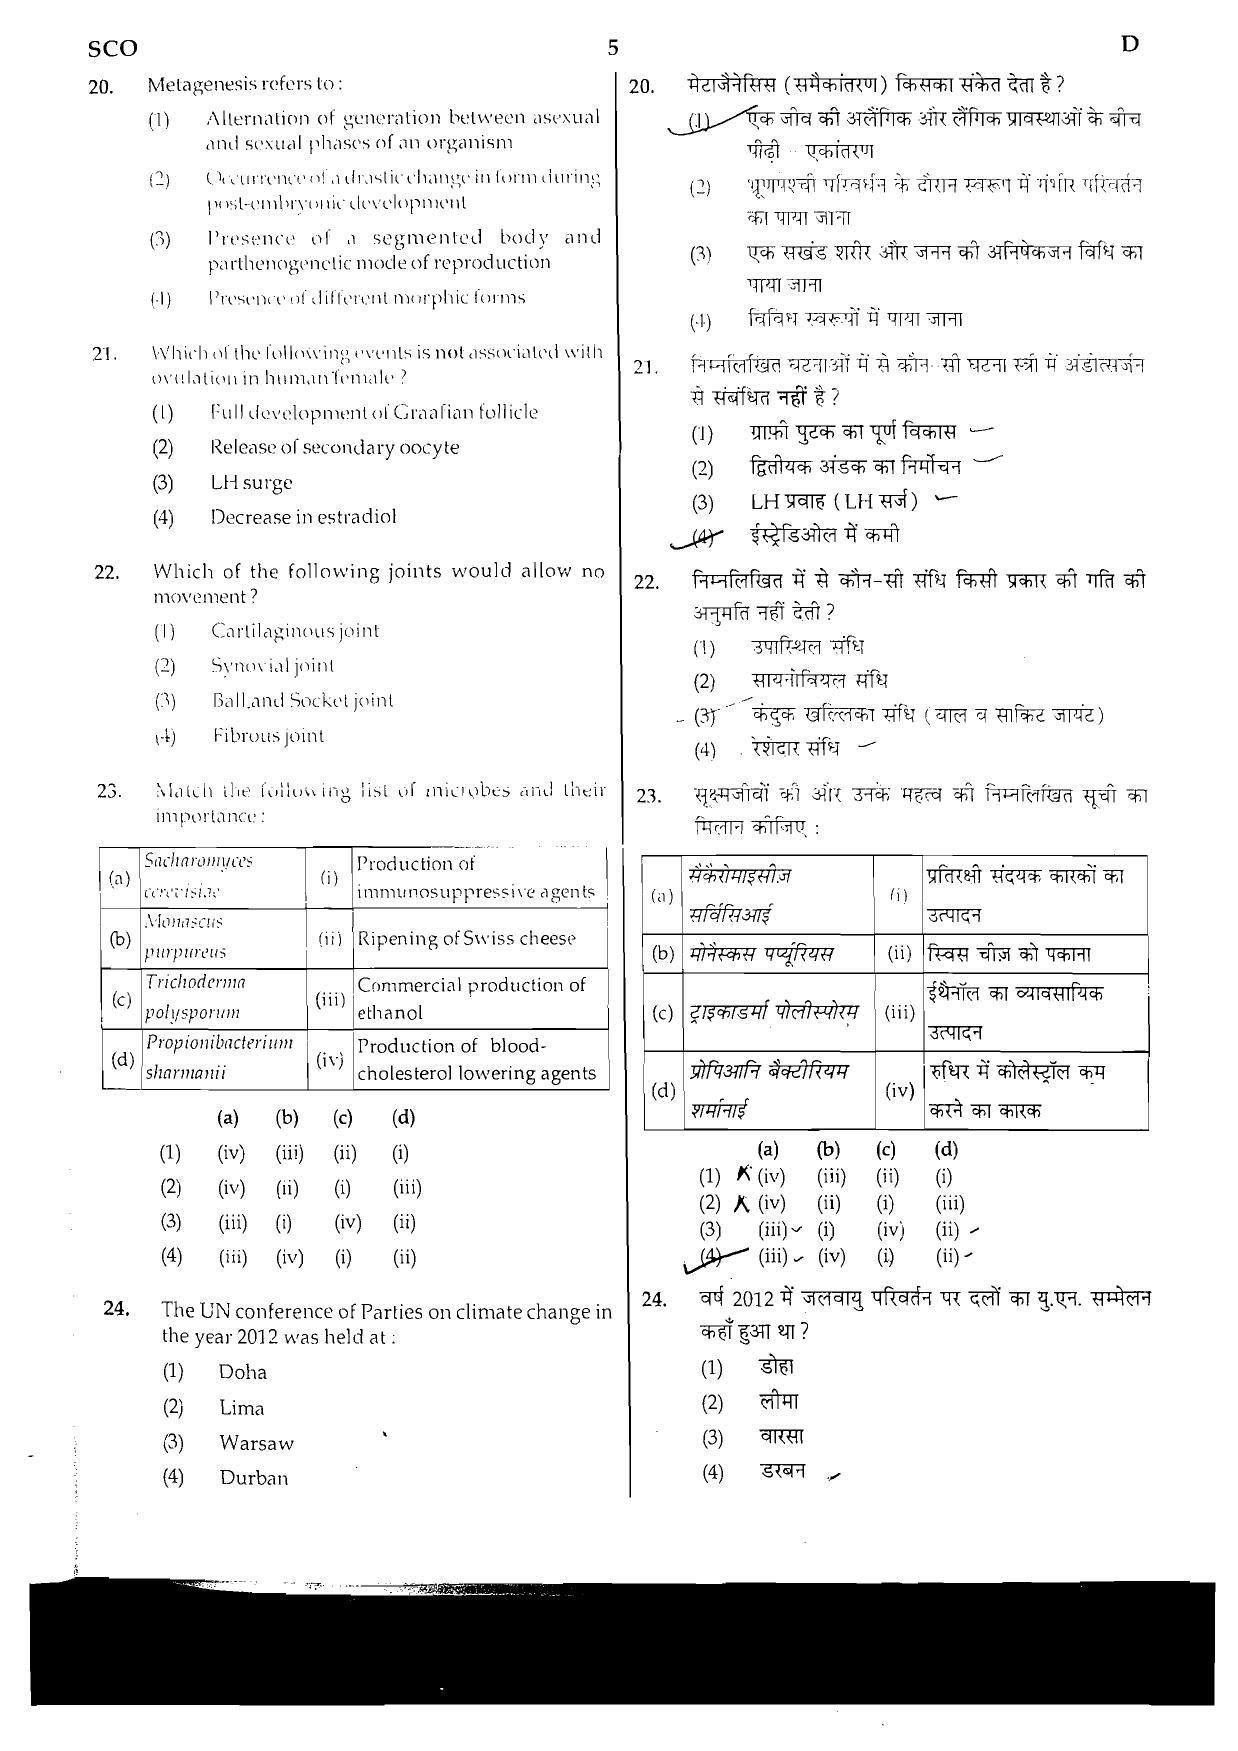 NEET Code D 2015 Question Paper - Page 5